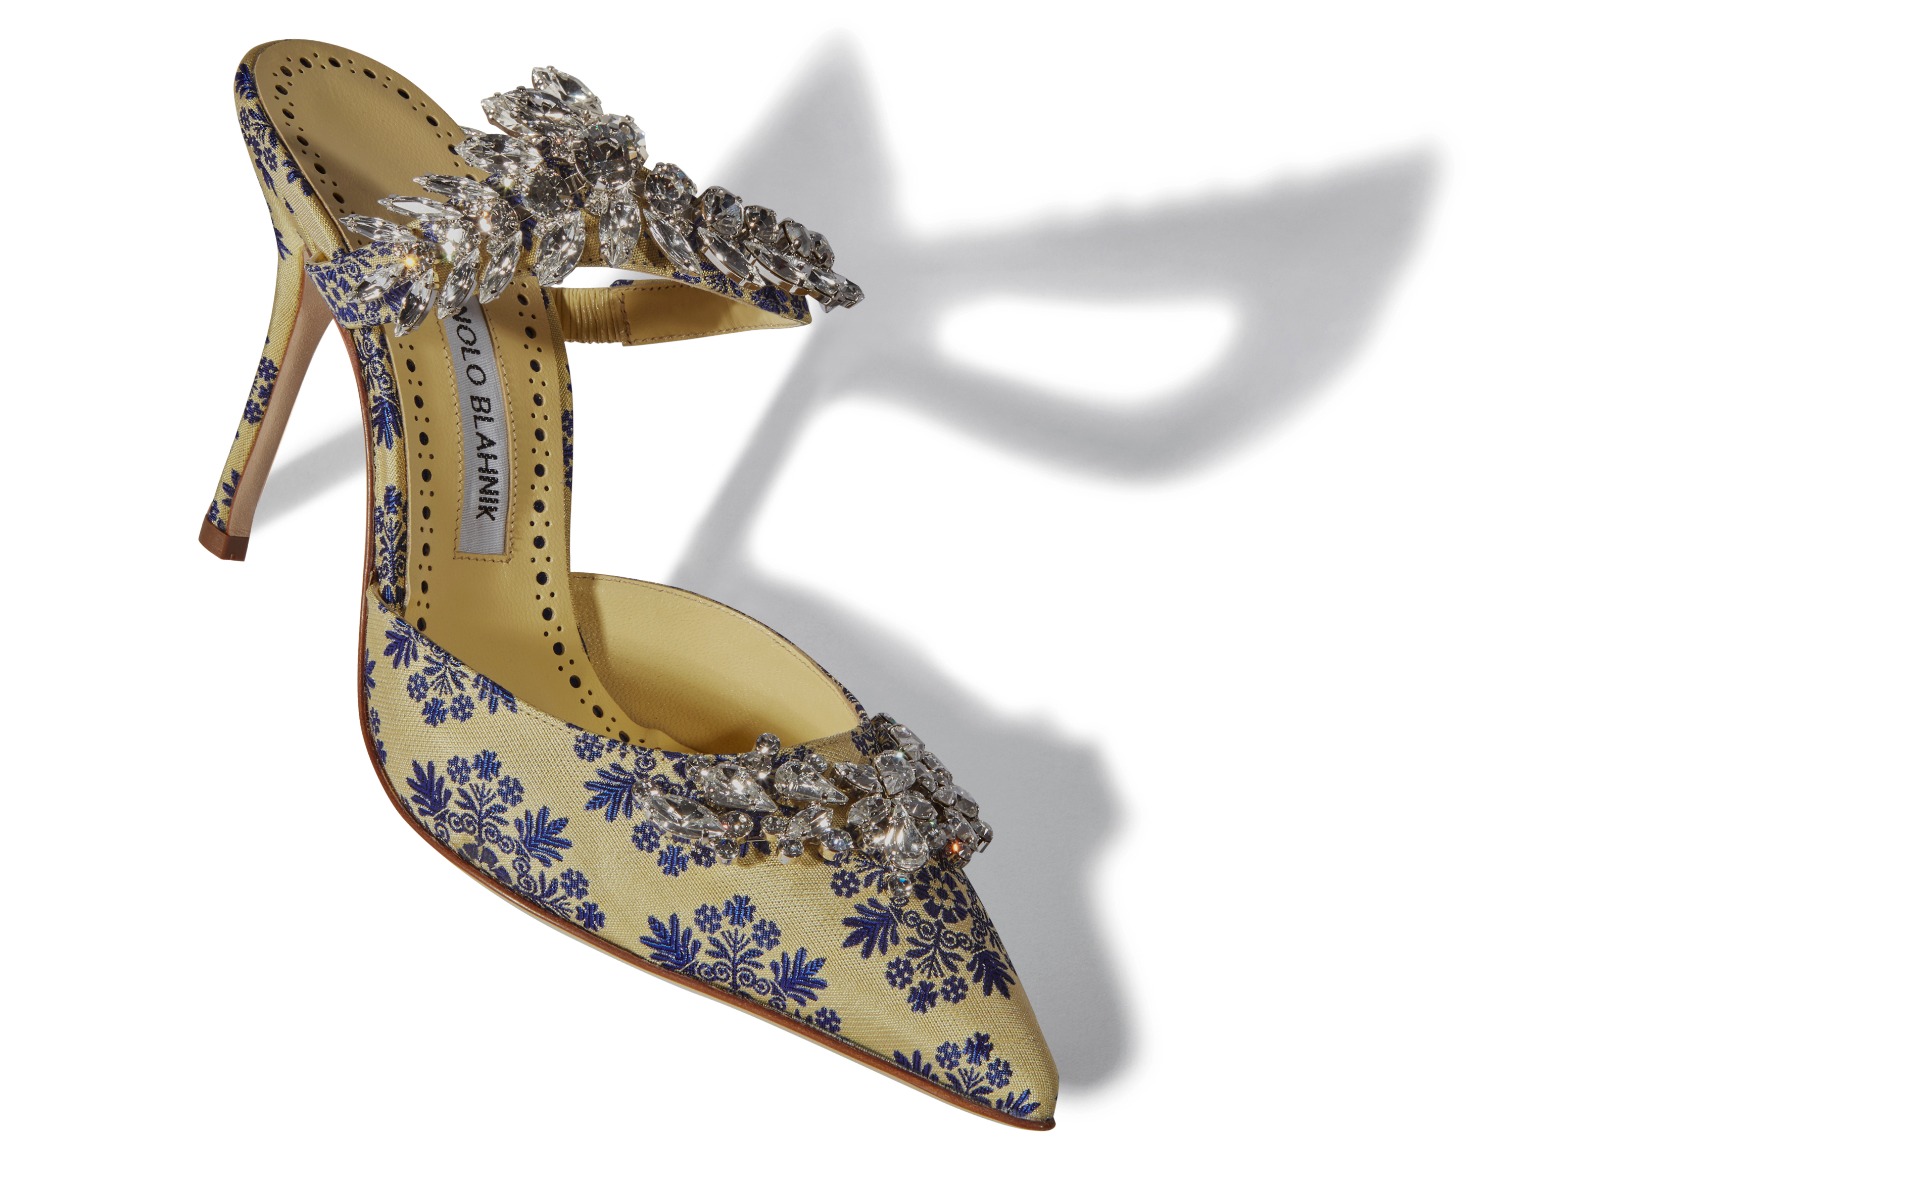 Introducing the Spring 2020 Collection - The Latest | Manolo Blahnik